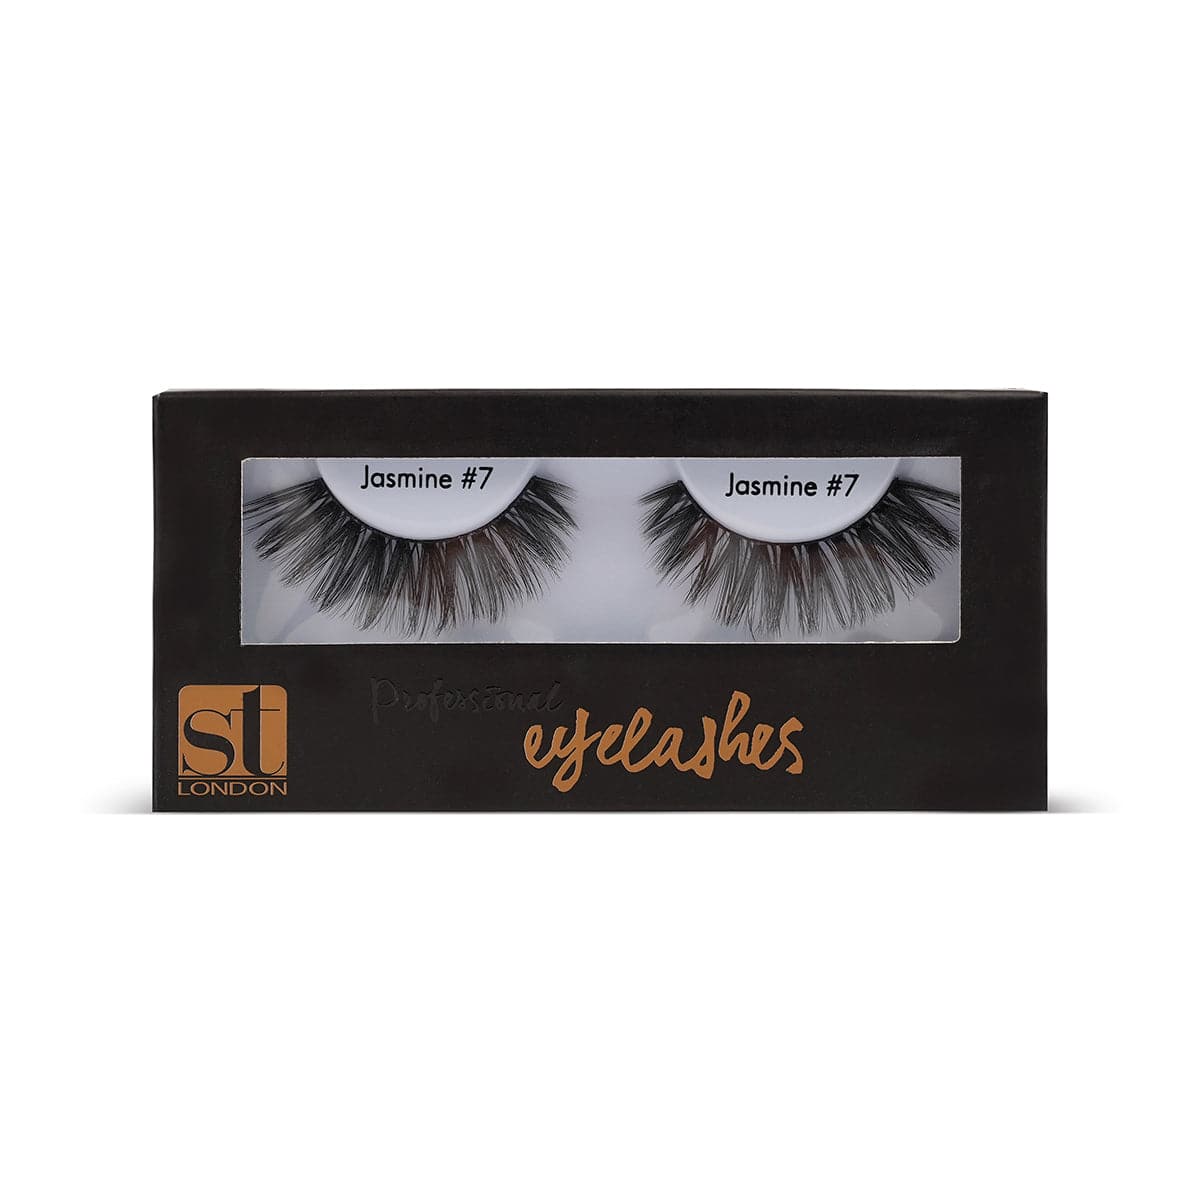 St London Eye Lashes 07 Jasmine - Premium  from ST London - Just Rs 1110.00! Shop now at Cozmetica